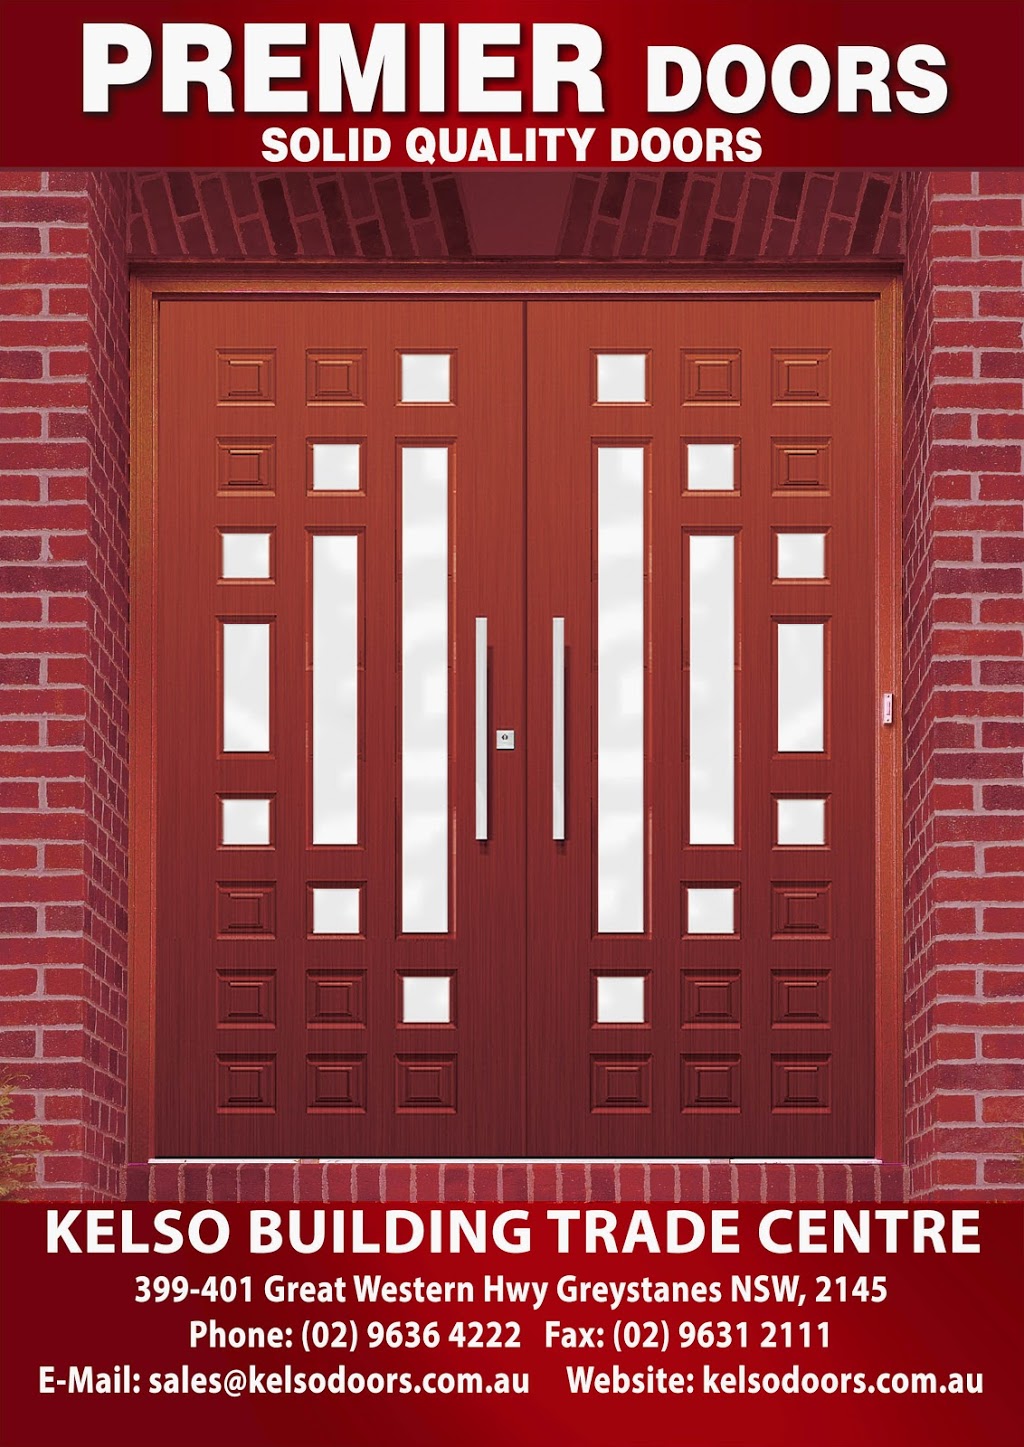 KELSO Building Trade Centre | store | 399-401 Great Western Hwy, Greystanes NSW 2145, Australia | 0296364222 OR +61 2 9636 4222